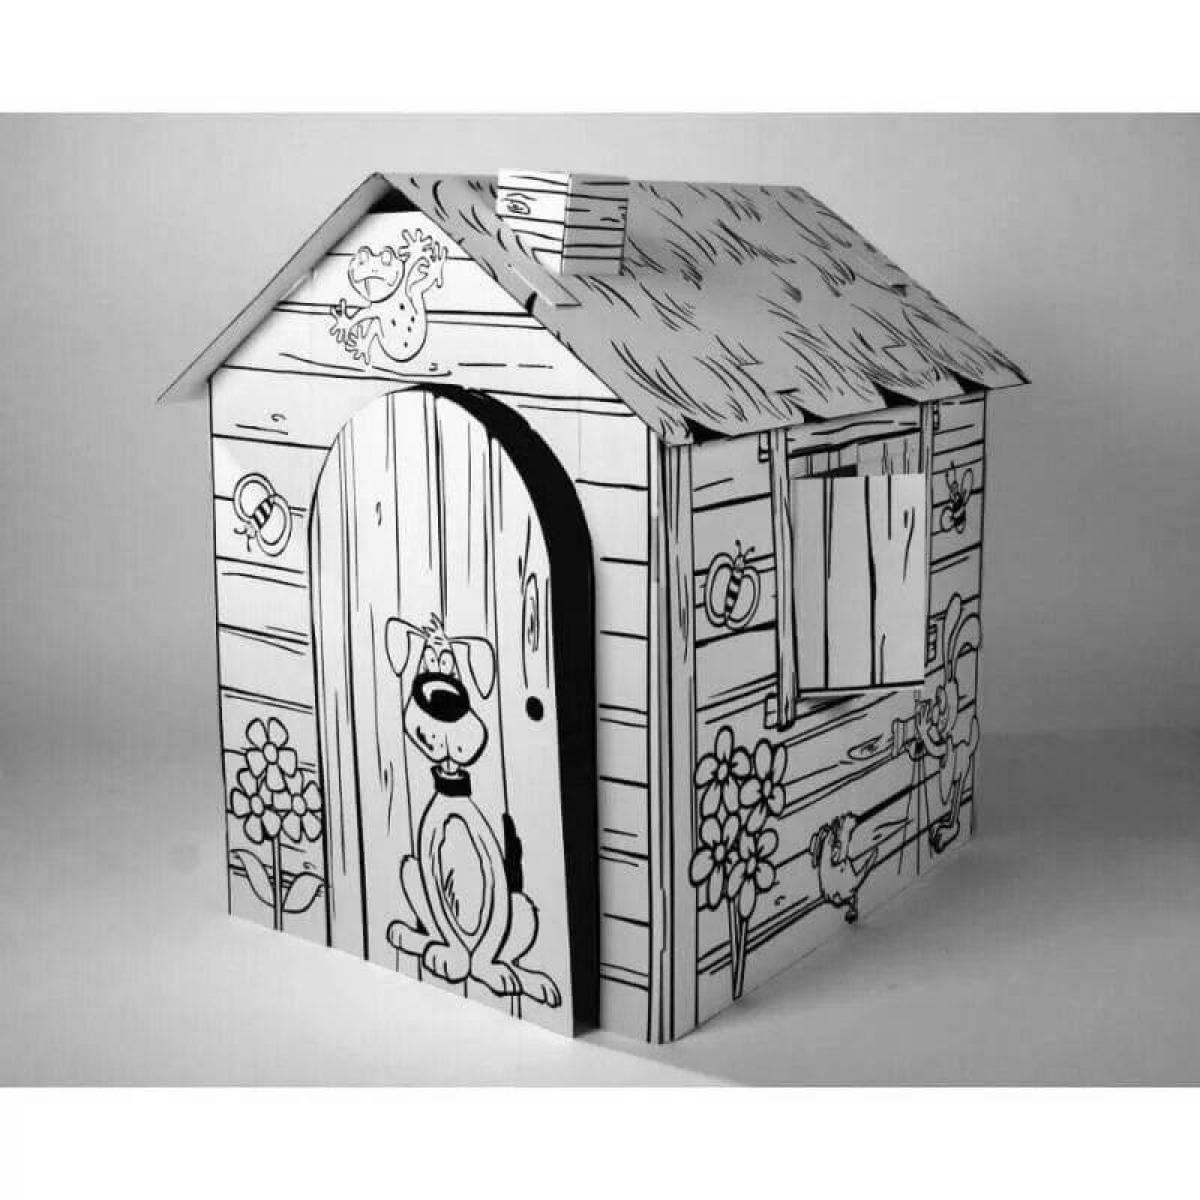 Perfect cardboard house coloring book for kids